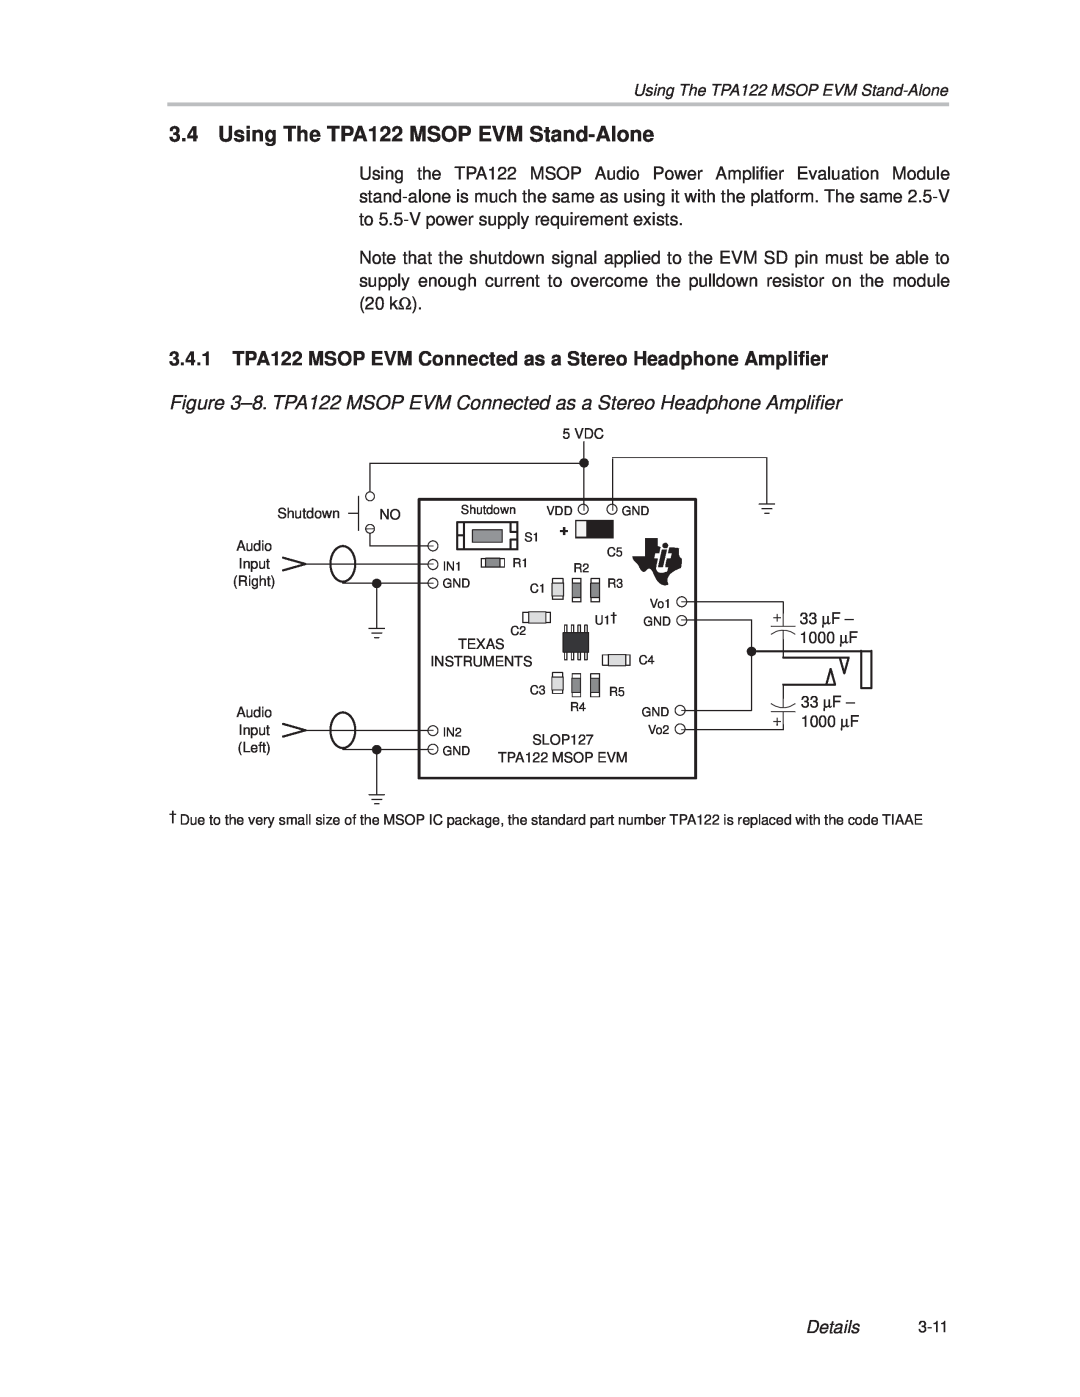 Texas Instruments SLOU025 manual Using The TPA122 MSOP EVM Stand-Alone, Details, +33 μF ± 1000 μF 33 μF ± +1000 μF 